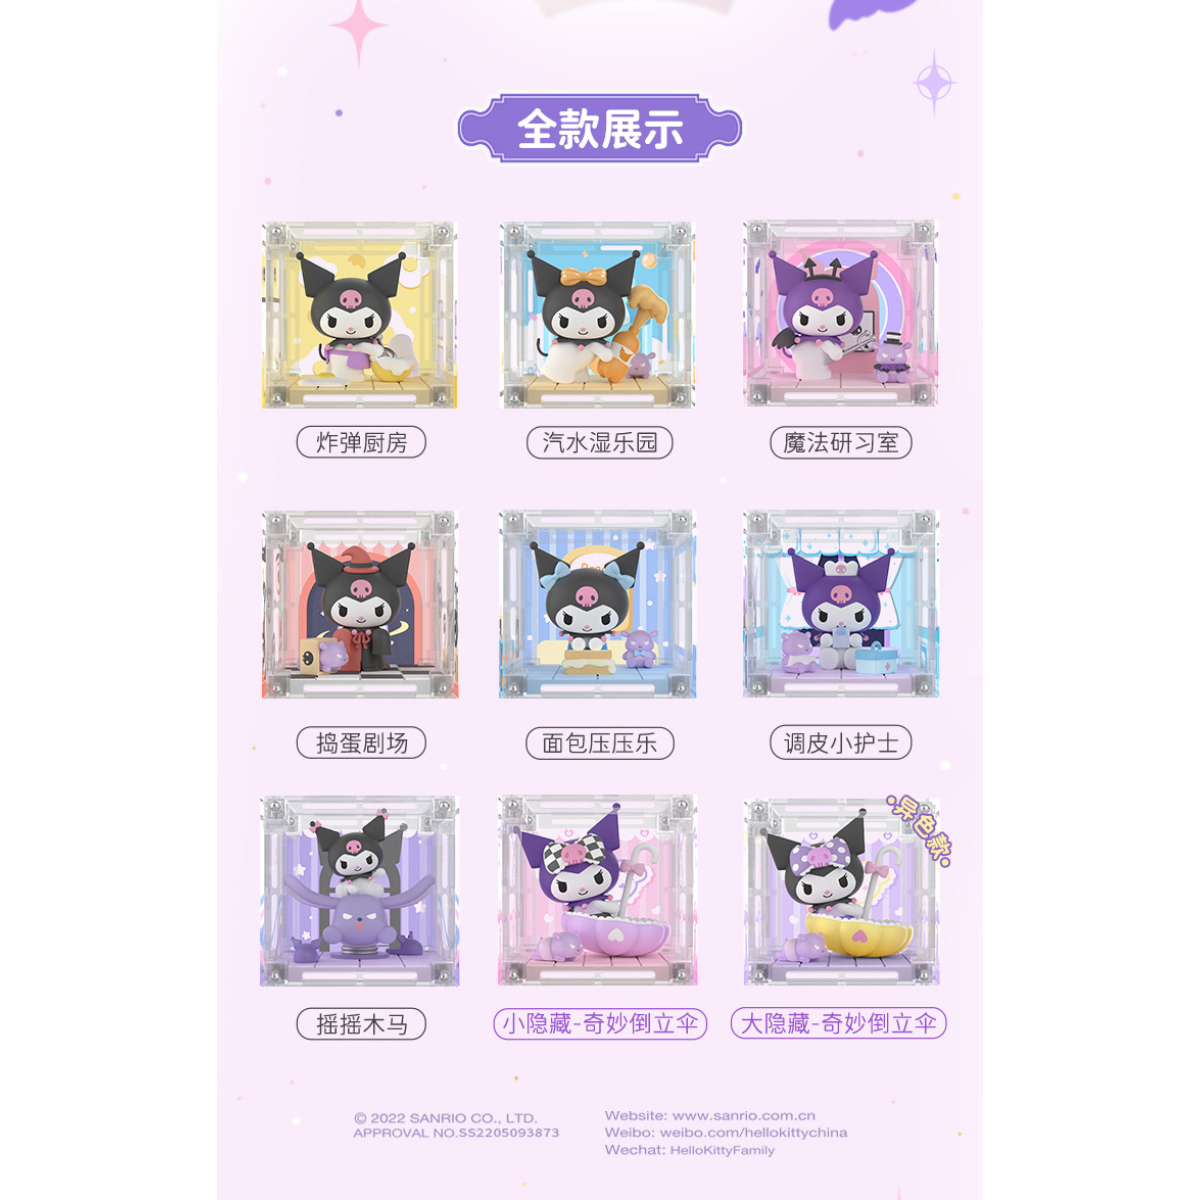 Moetch x Sanrio Characters Kuromi Trick or Treat Alliance Series-Single Box (Random)-Moetch-Ace Cards &amp; Collectibles